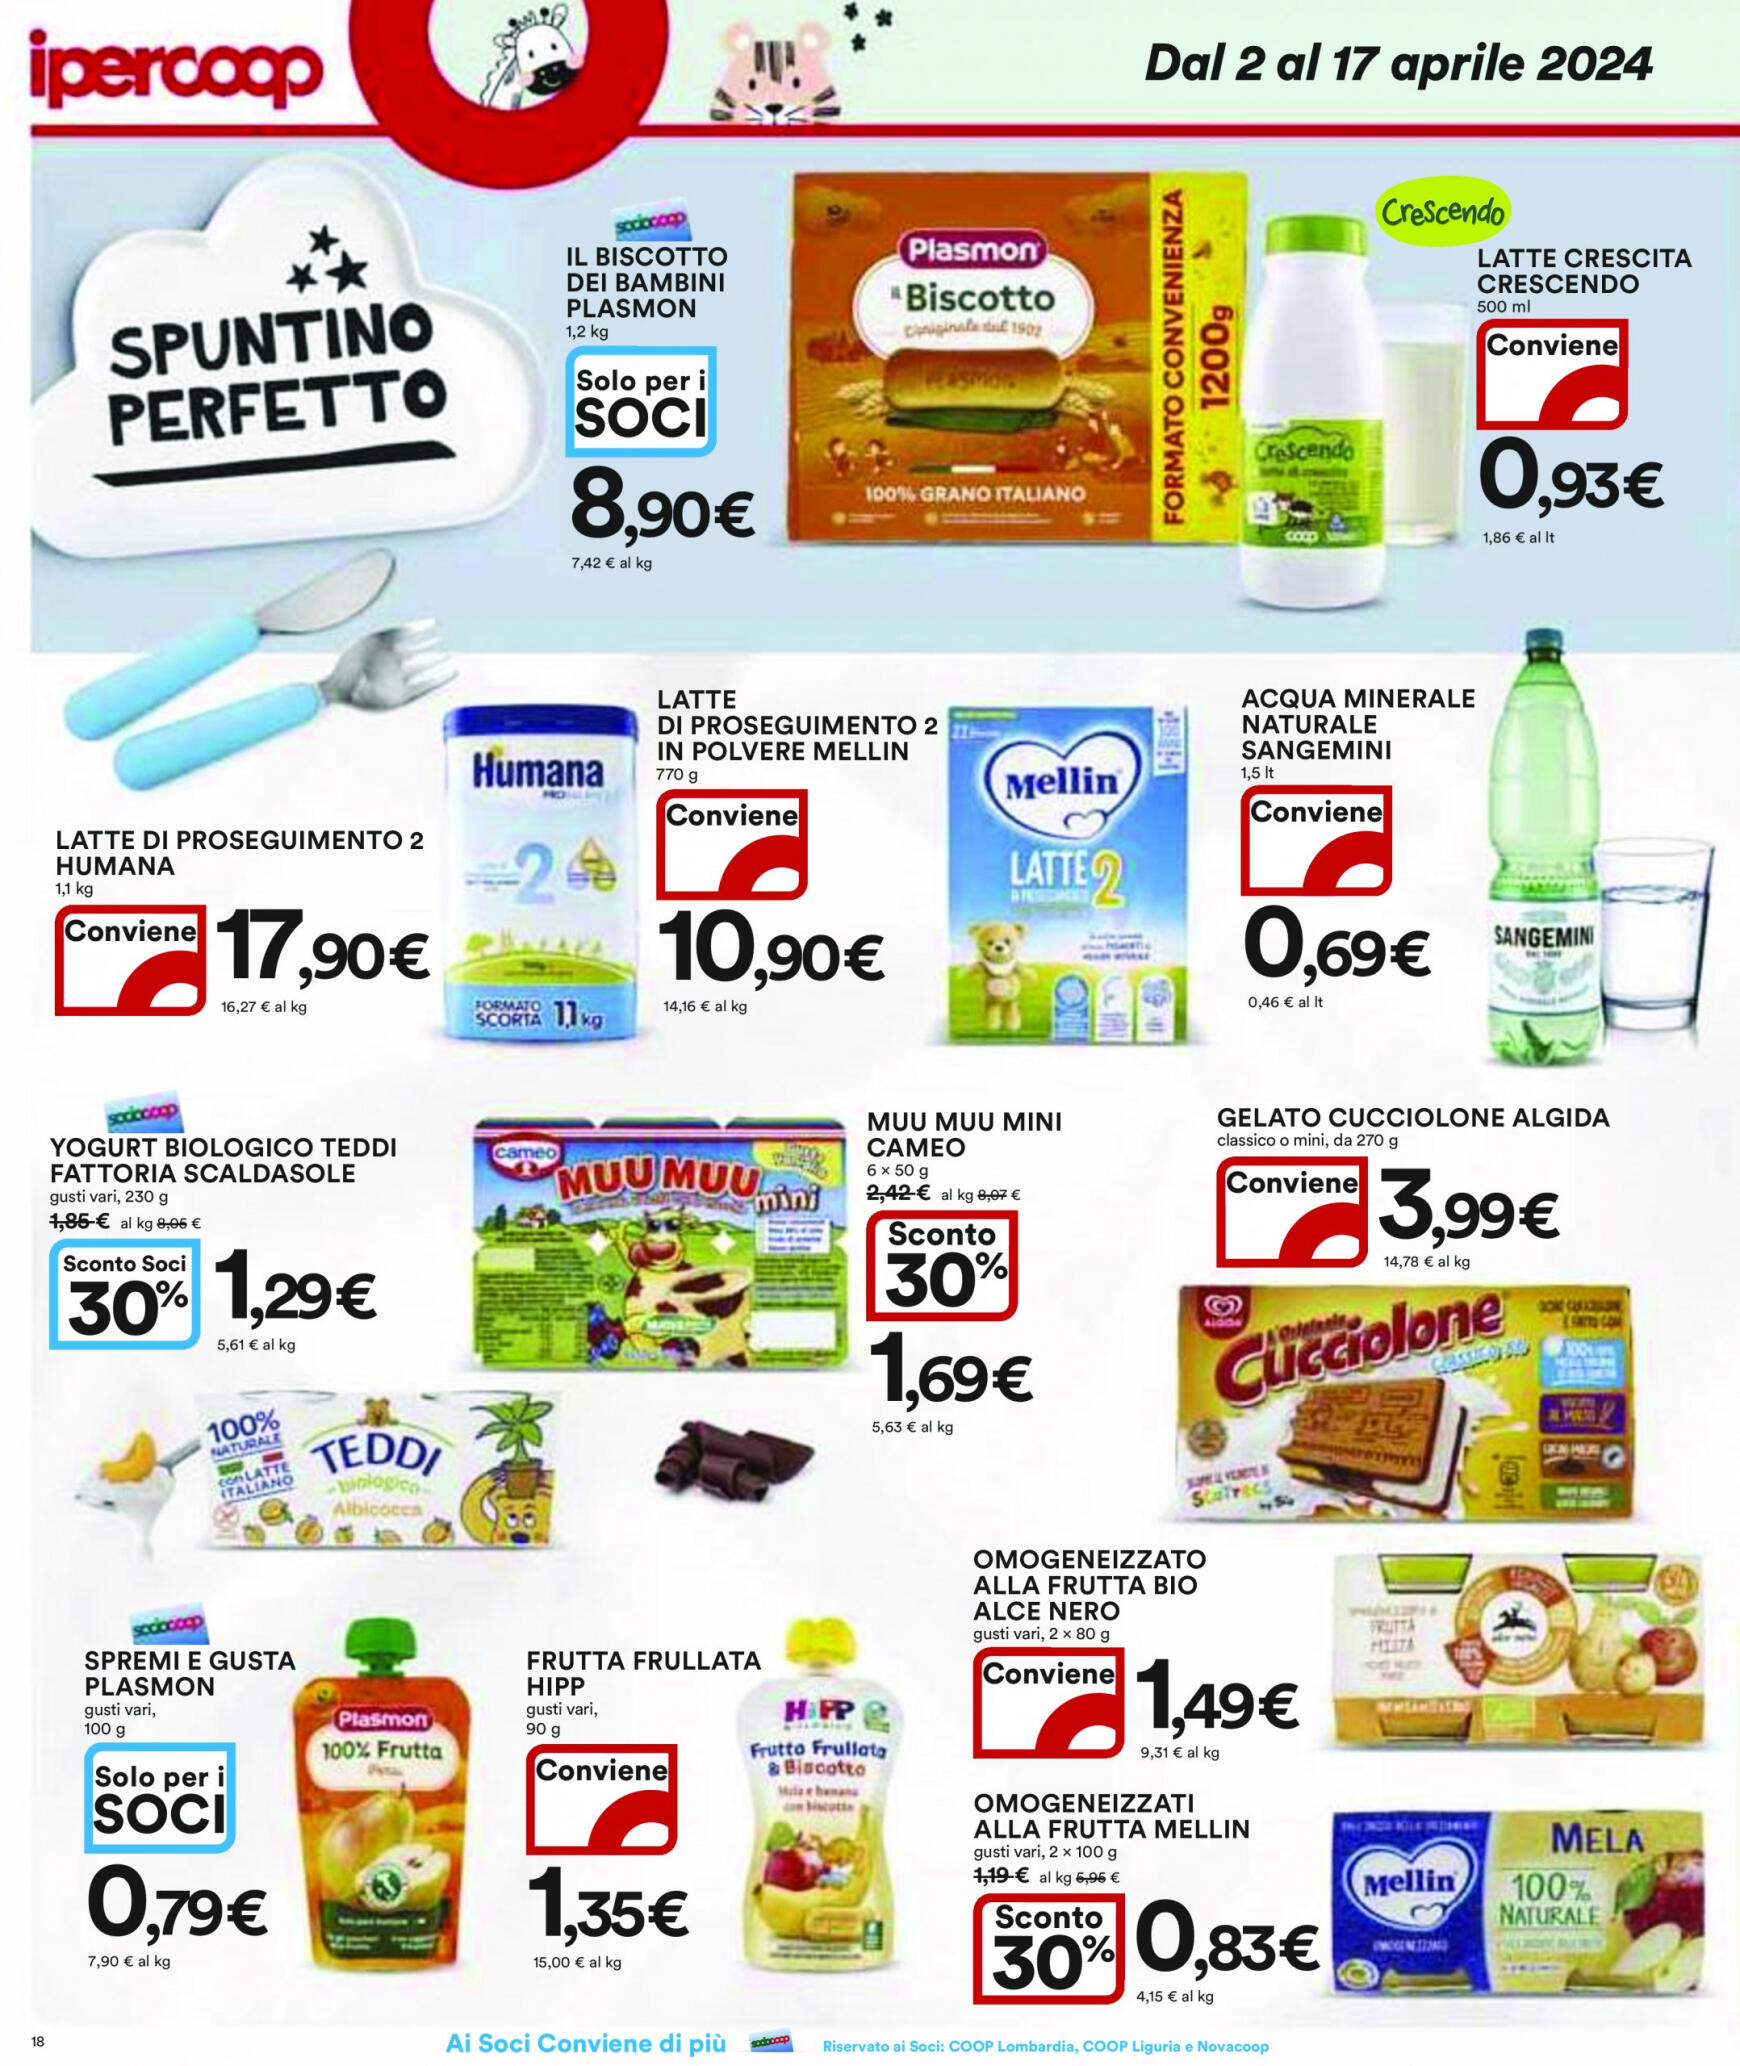 coop - Nuovo volantino Coop 02.04. - 17.04. - page: 18